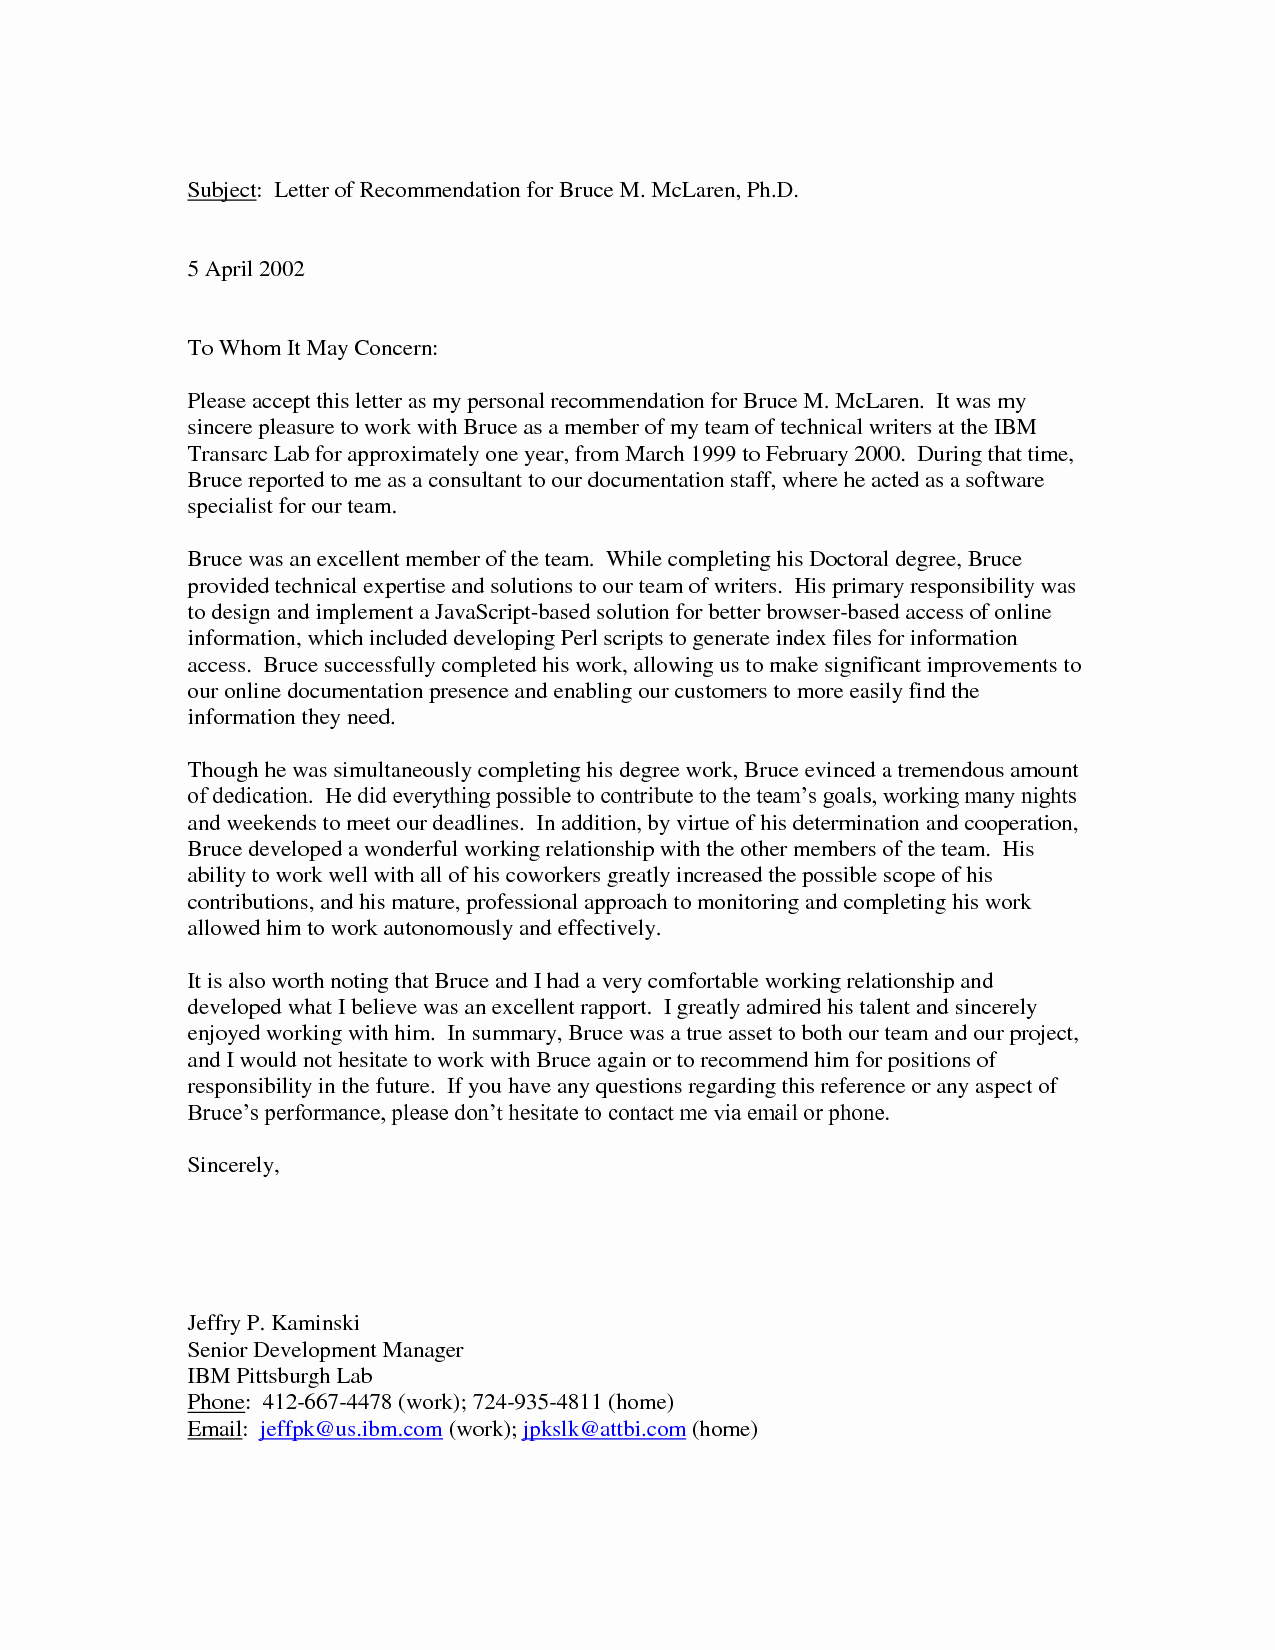 Personal Reference Letter Template Word Fresh Personal Letter Re Mendation